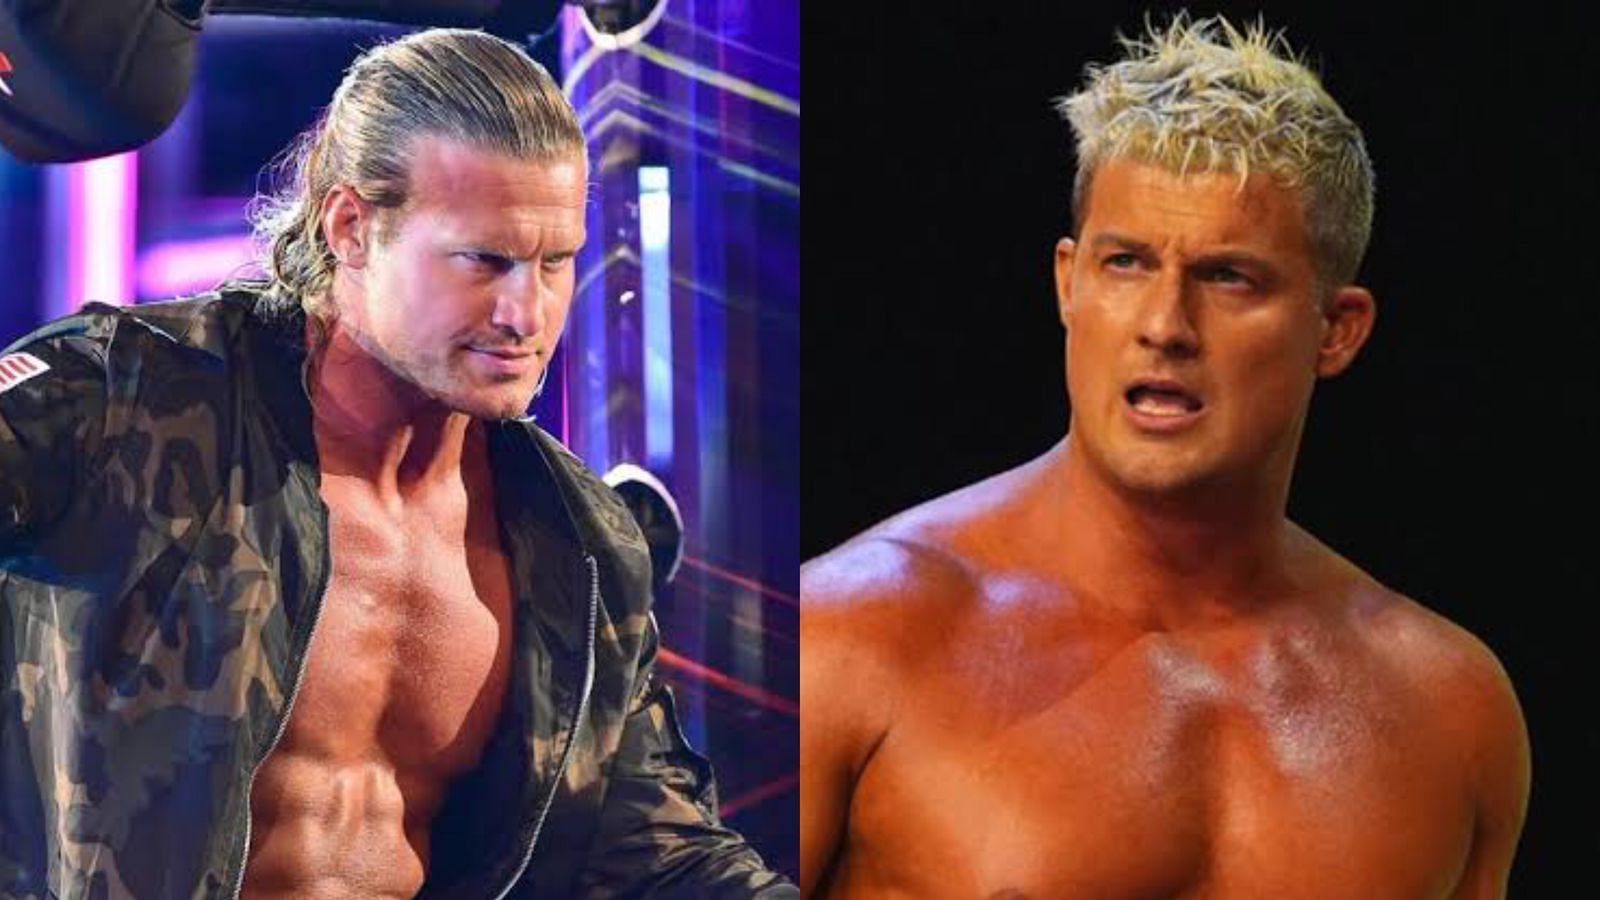 Dolph Ziggler is a multiple time World Champion in WWE